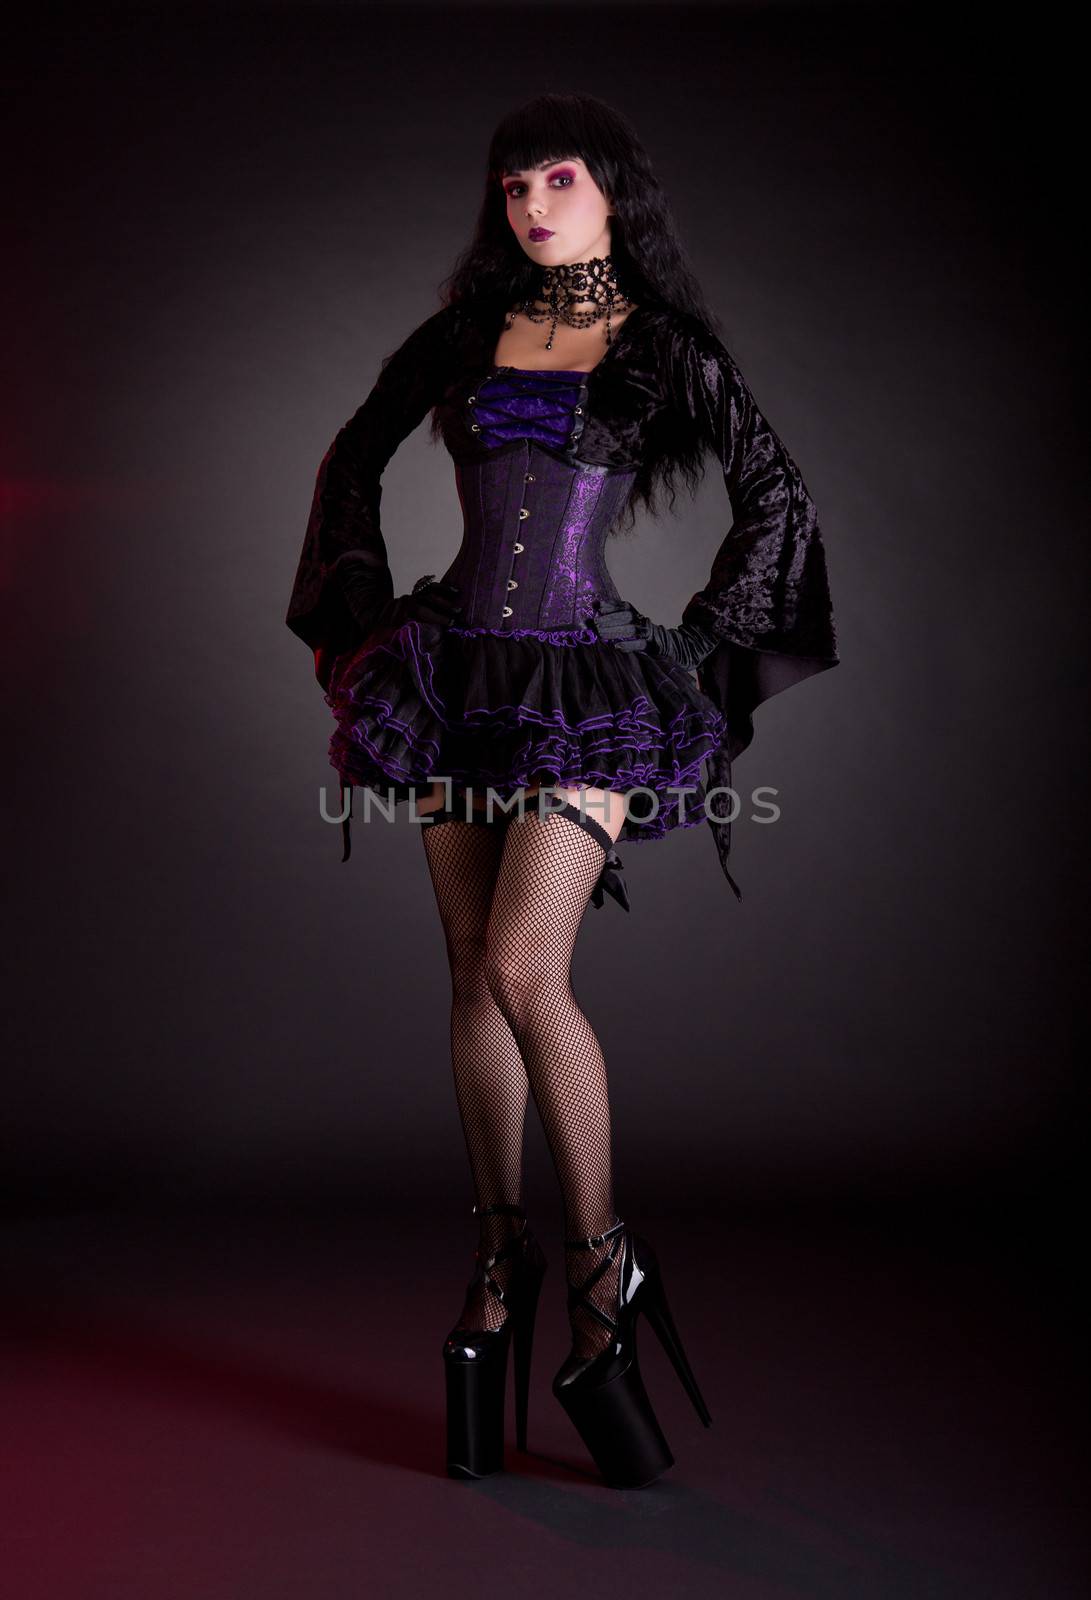 Sexy young woman in black and purple costume wearing extra high heels  